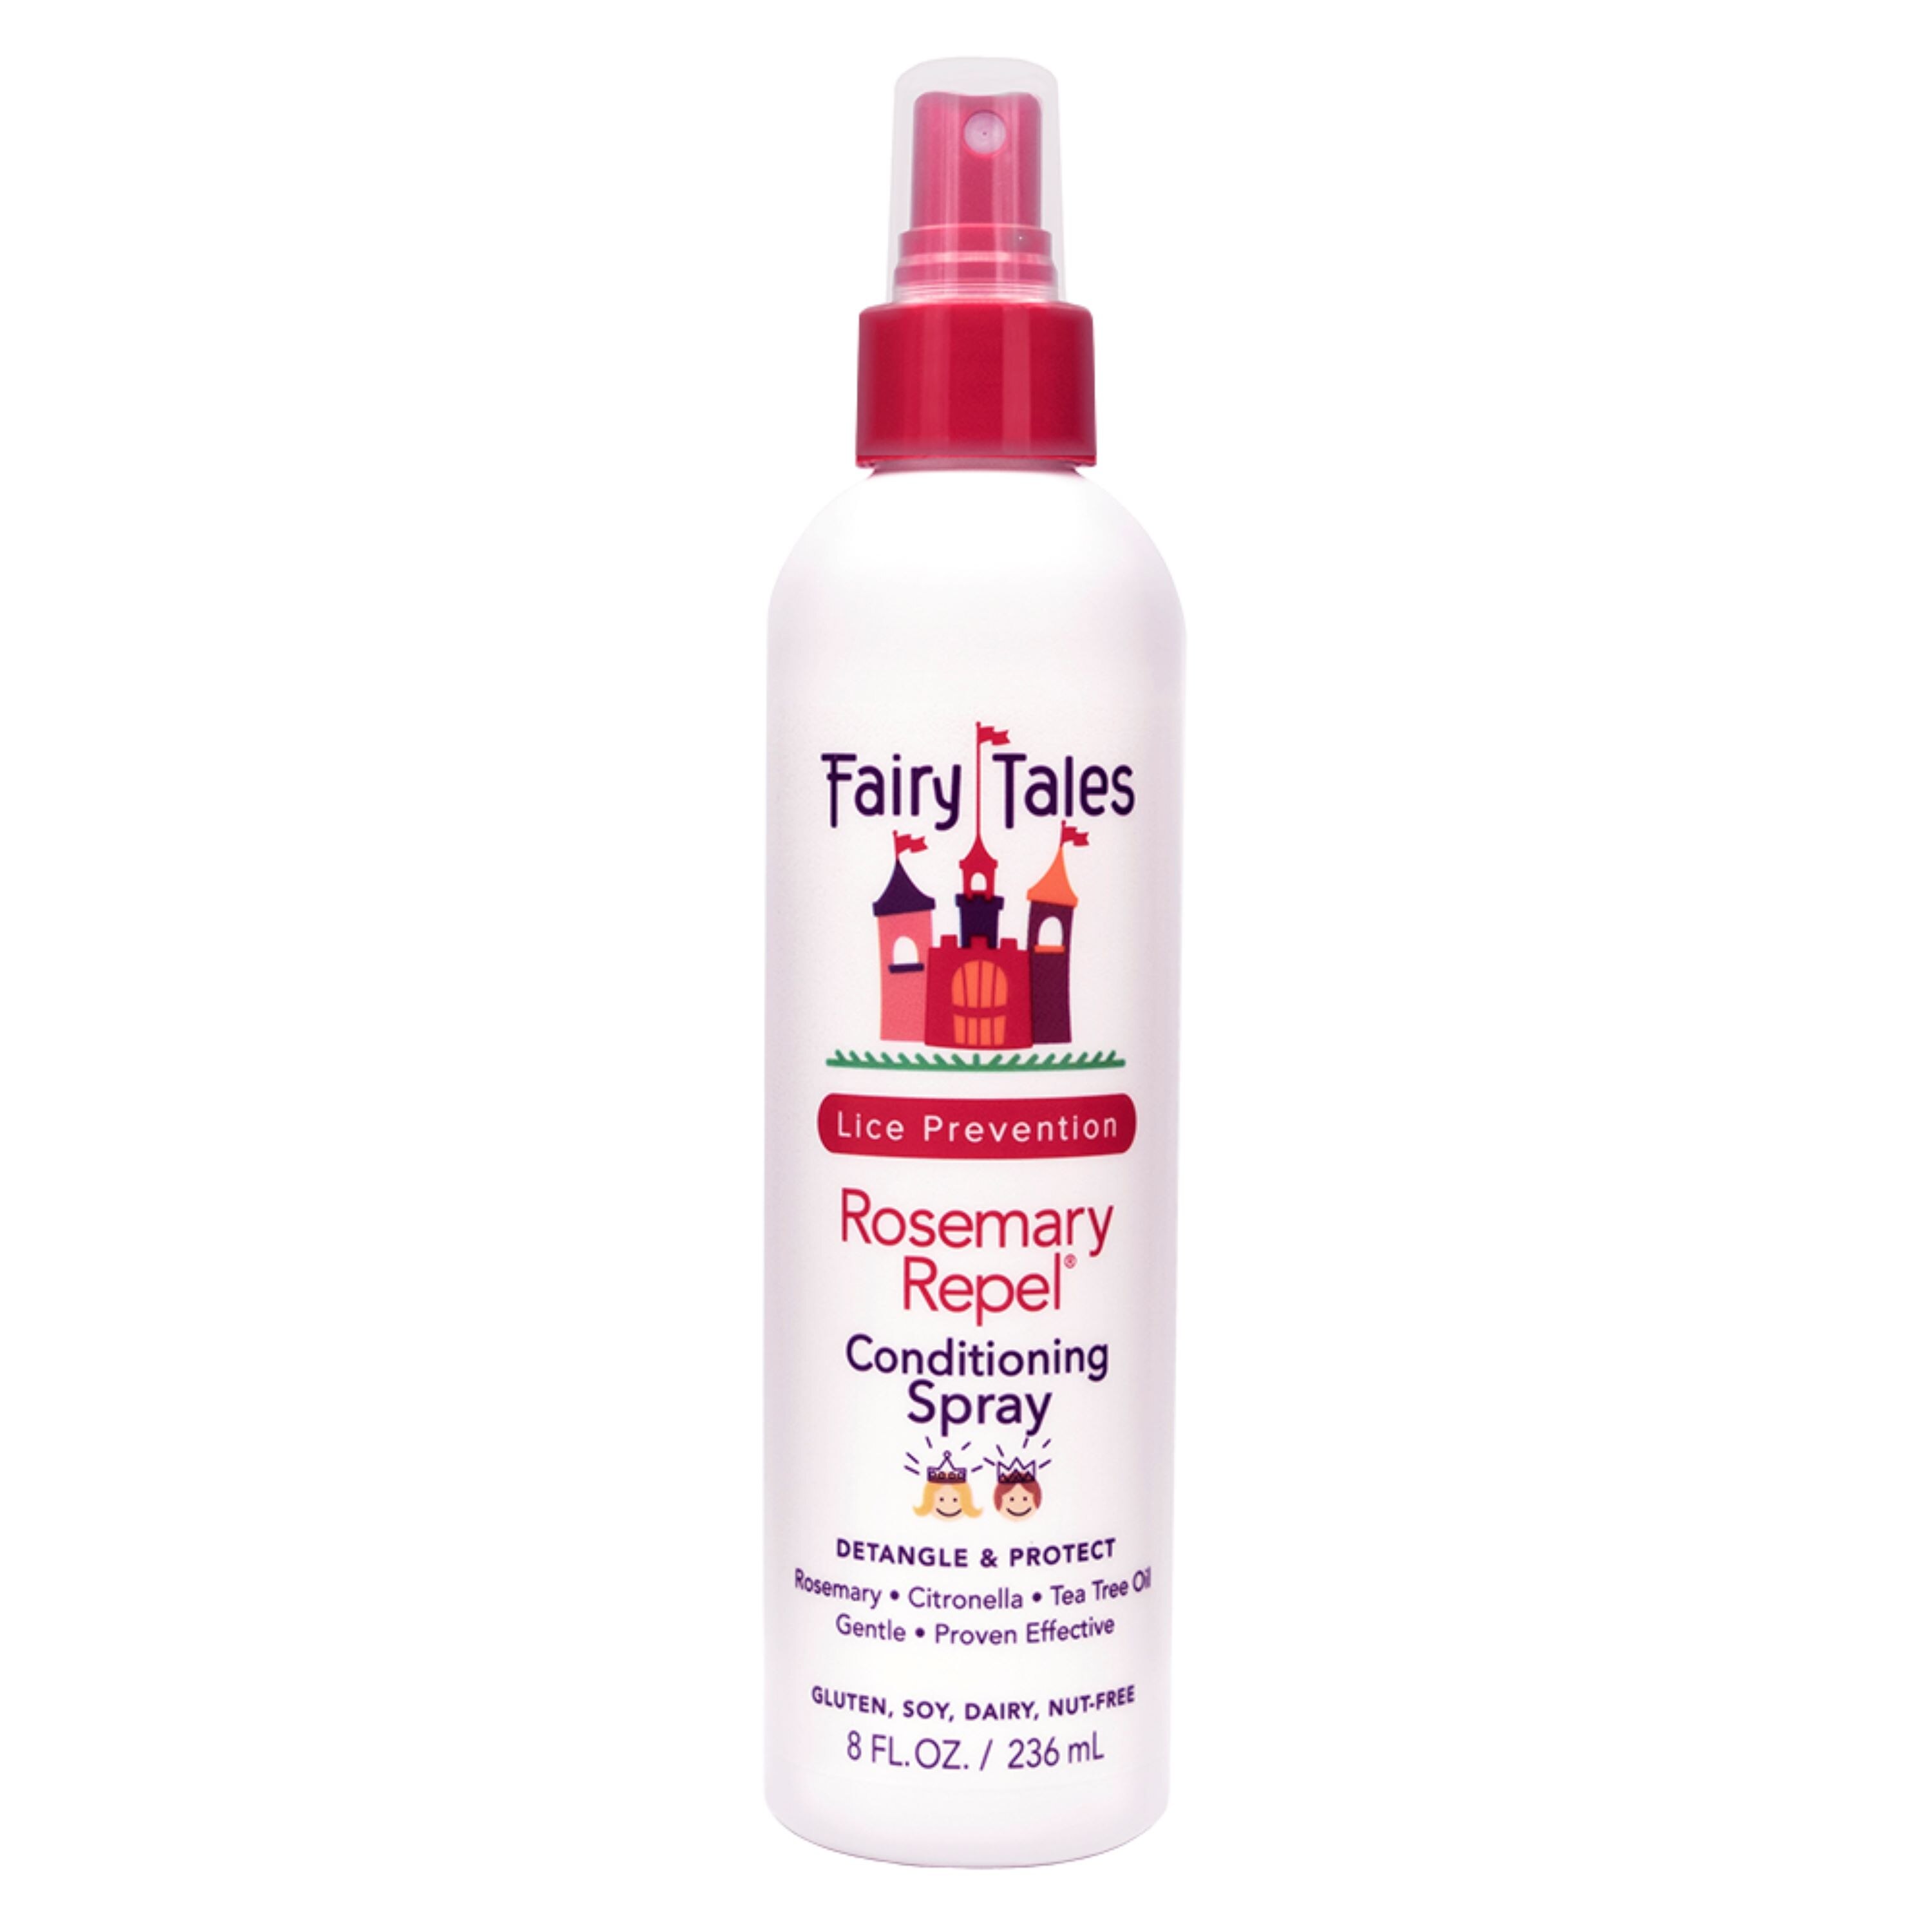 Fairy Tales Rosemary Repel Lice Prevention Conditioning Spray